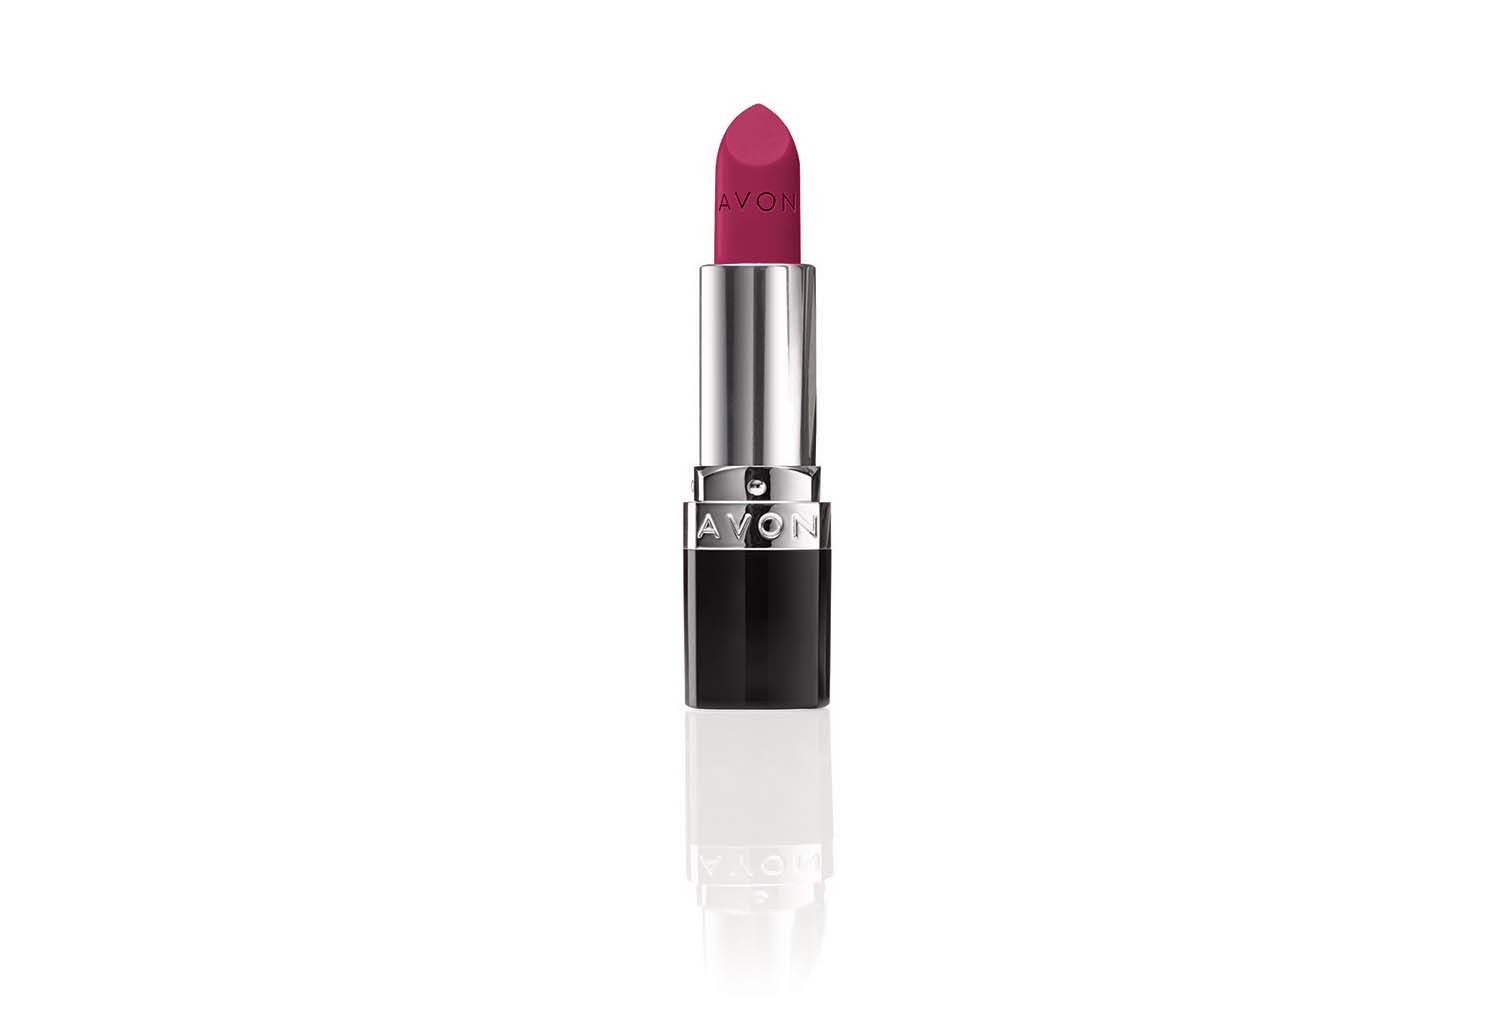 Avon True Color Lipstick in Cherry Jubilee is the brand’s most popular shade